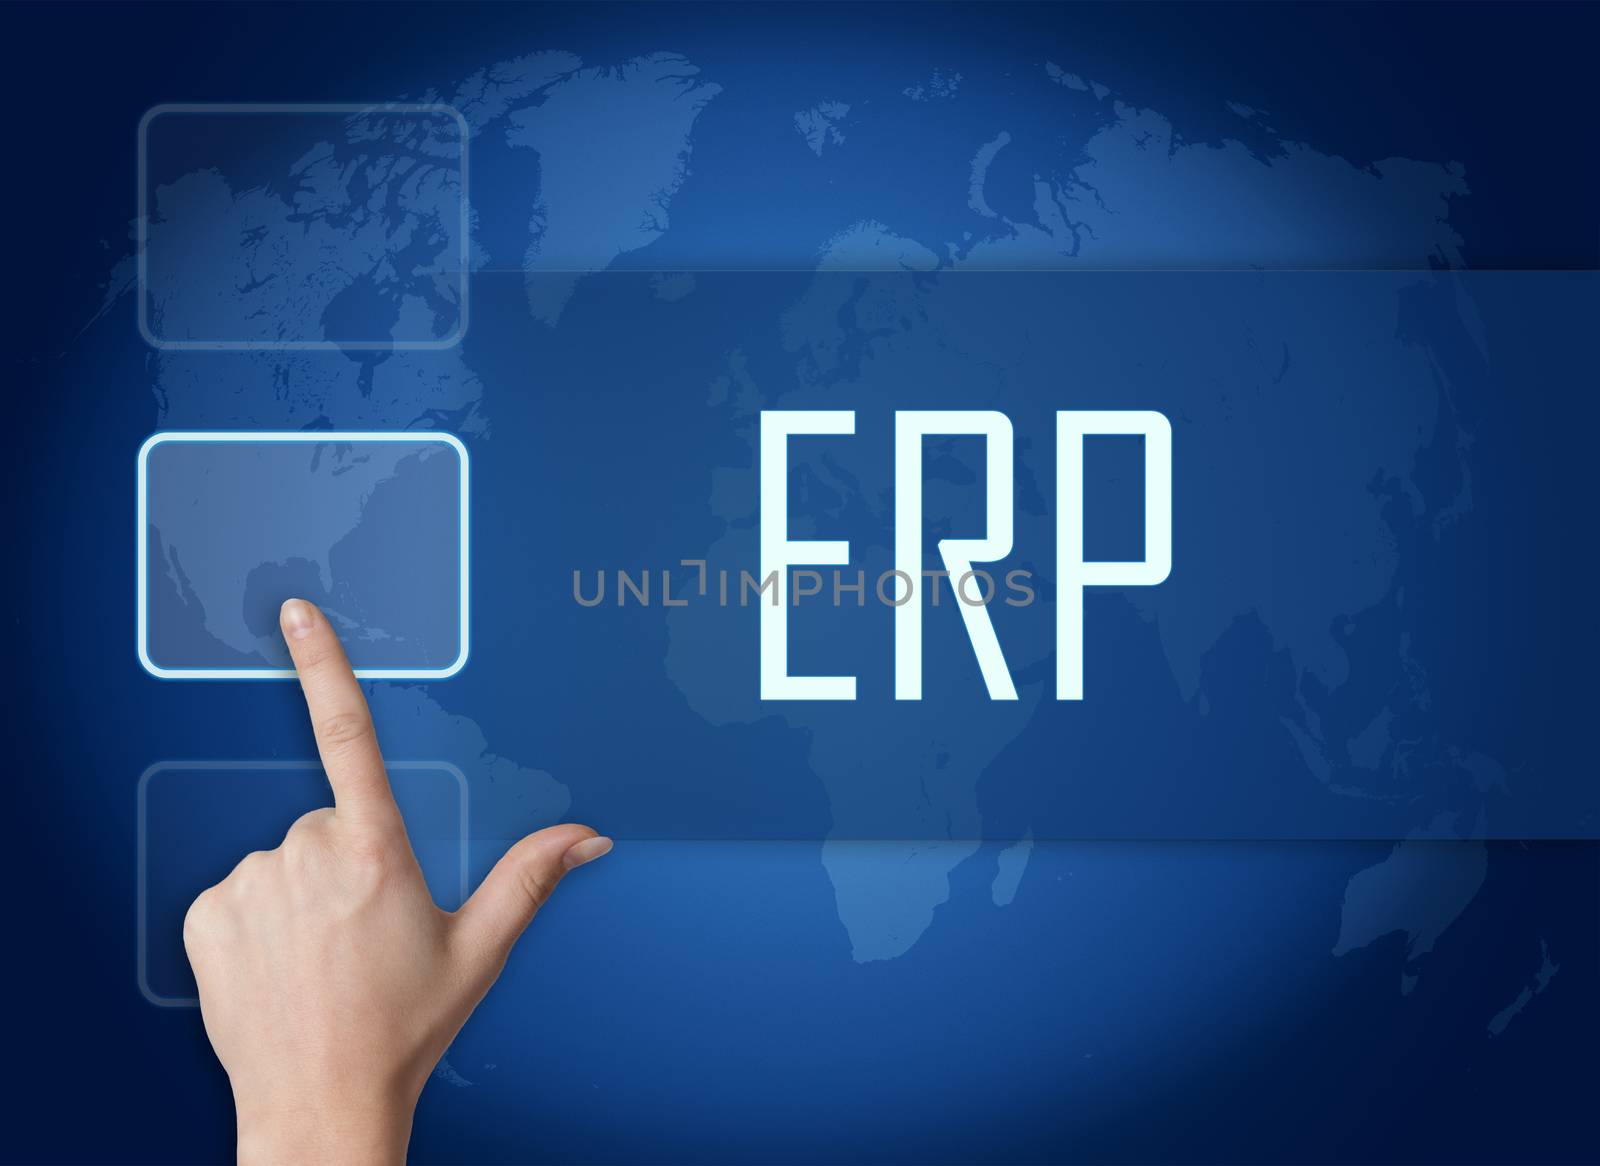 Enterprise Resource Planning concept with interface and world map on blue background